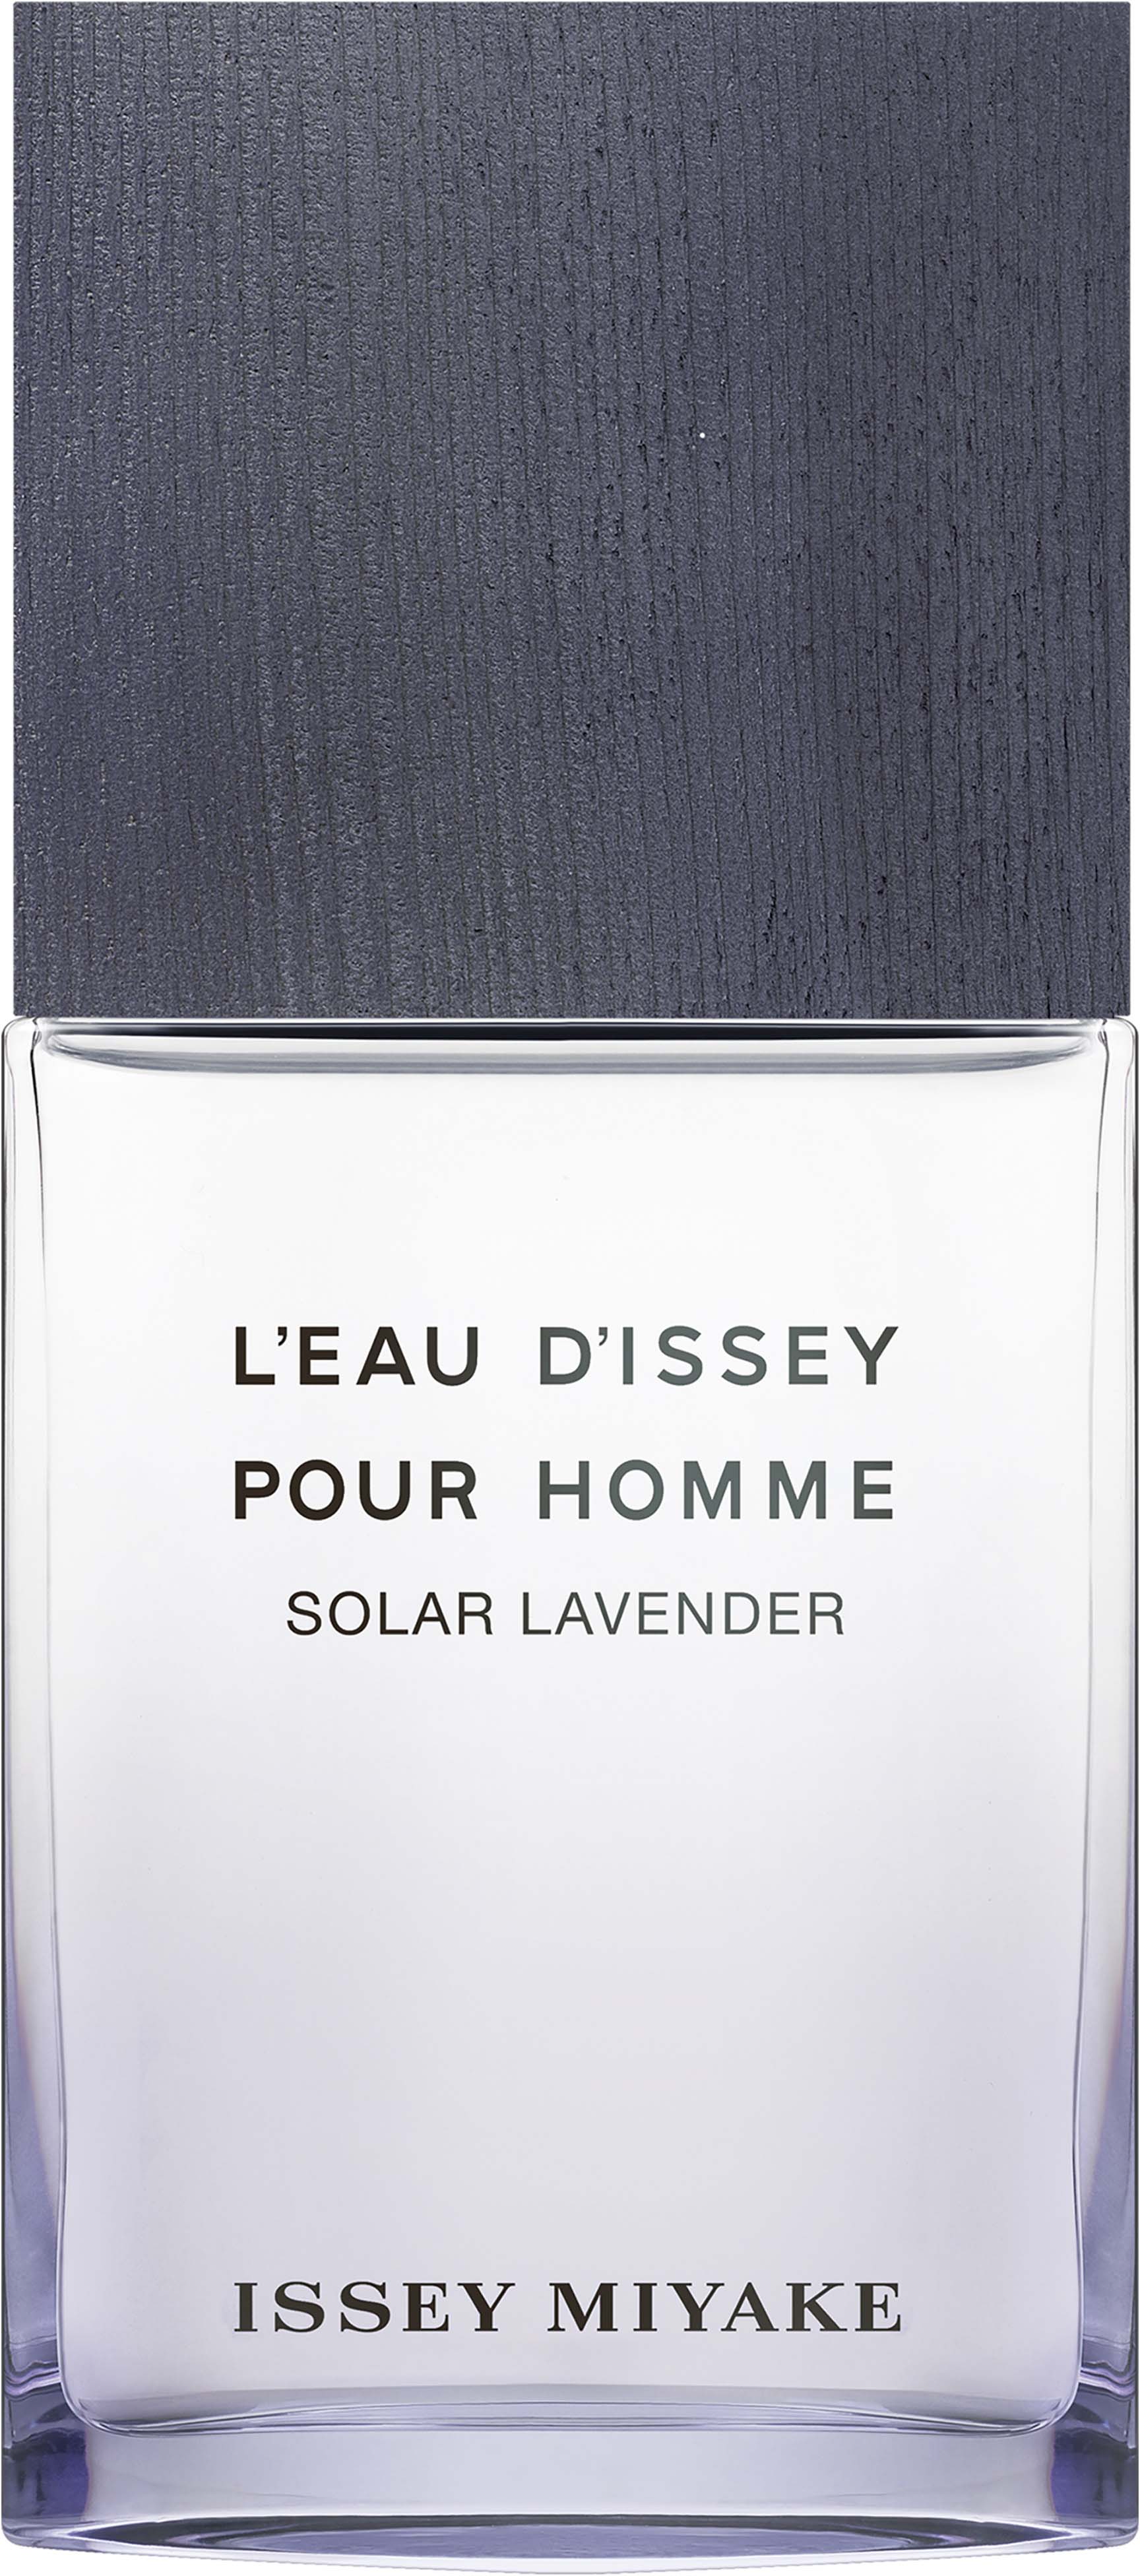 issey miyake l'eau d'issey pour homme intense woda toaletowa 50 ml   